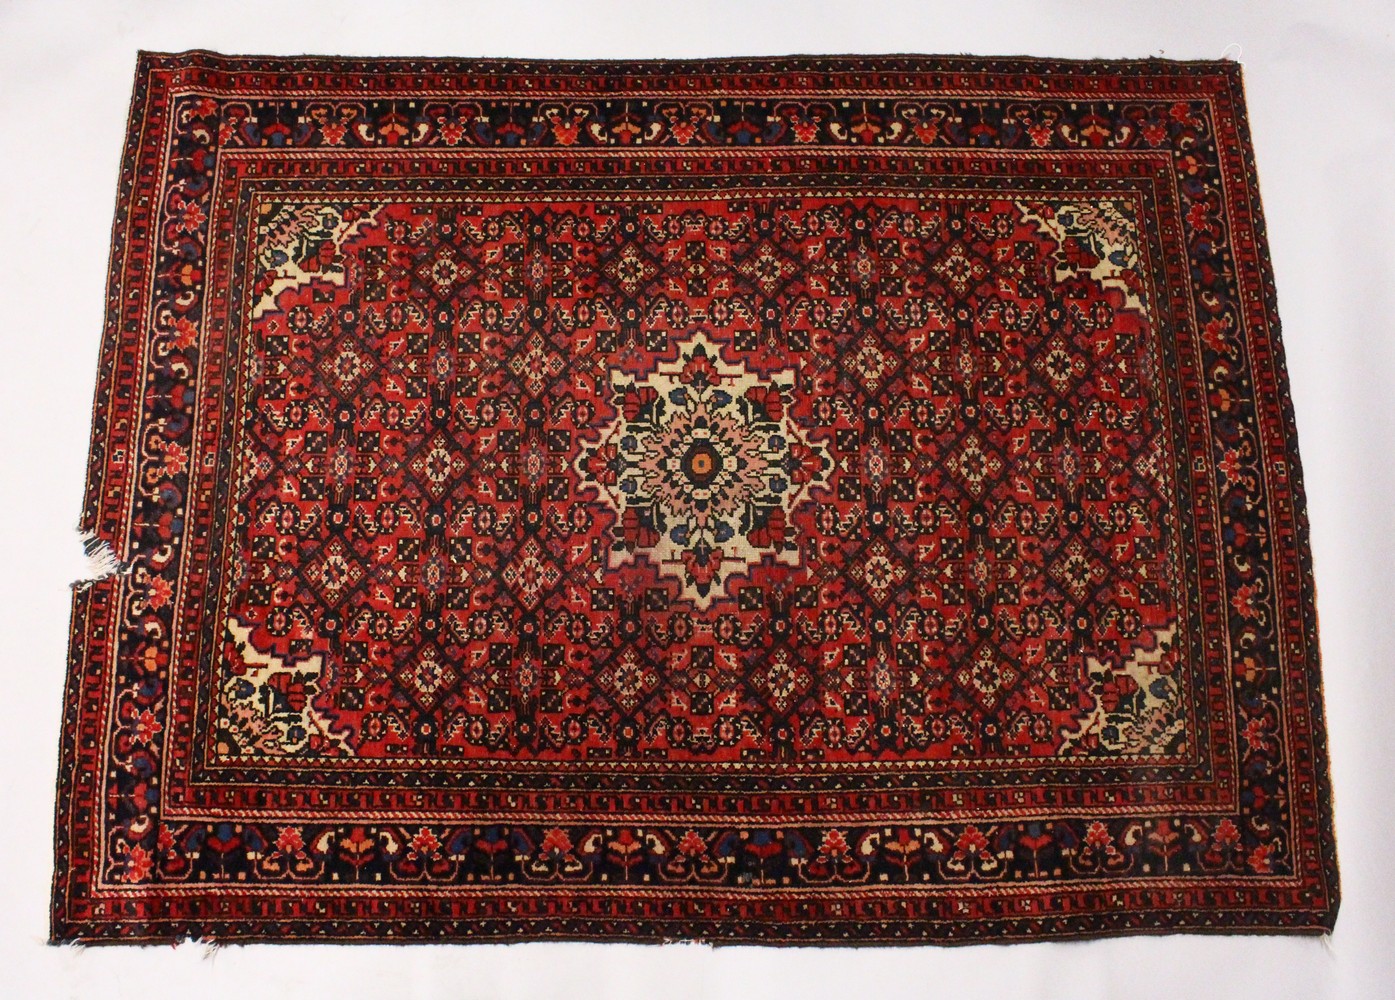 A PERSIAN RUG, 20TH CENTURY, red ground with central medallion, within a dark blue border. 6ft